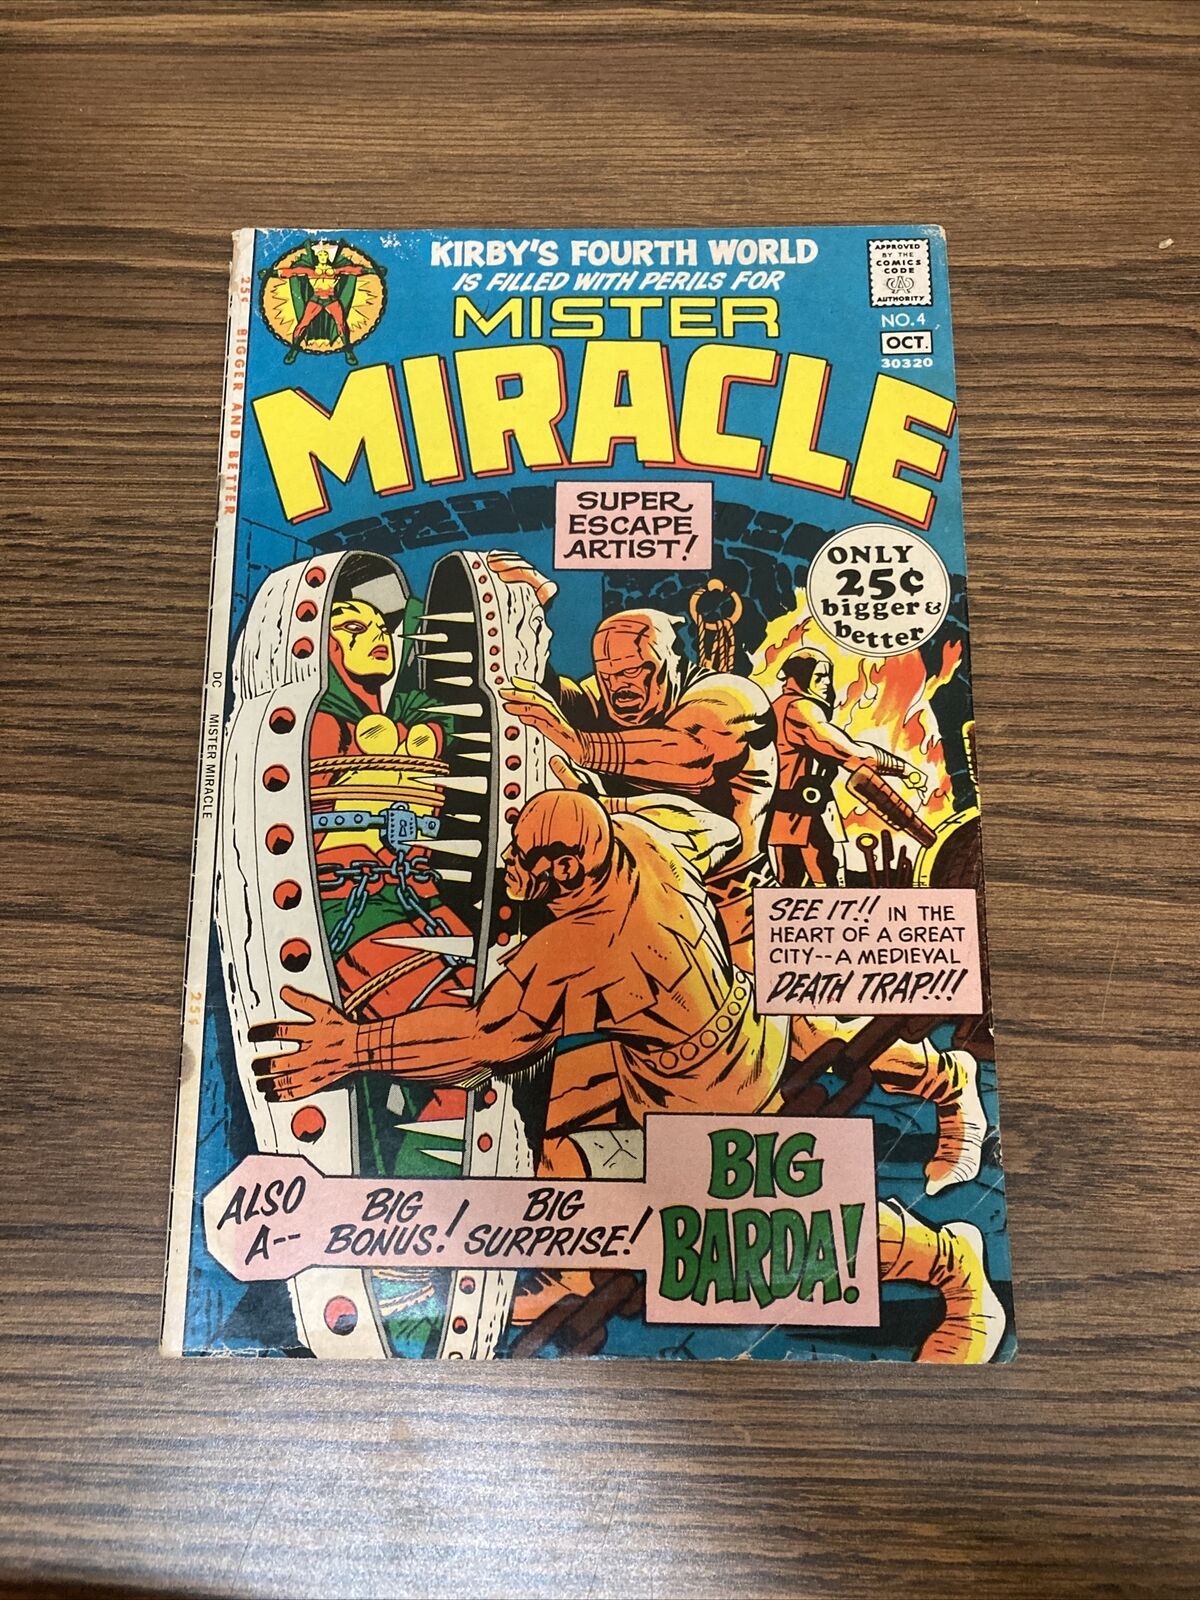 Mister Miracle #4 1st Appearance Of Big Barda DC Comics 1971